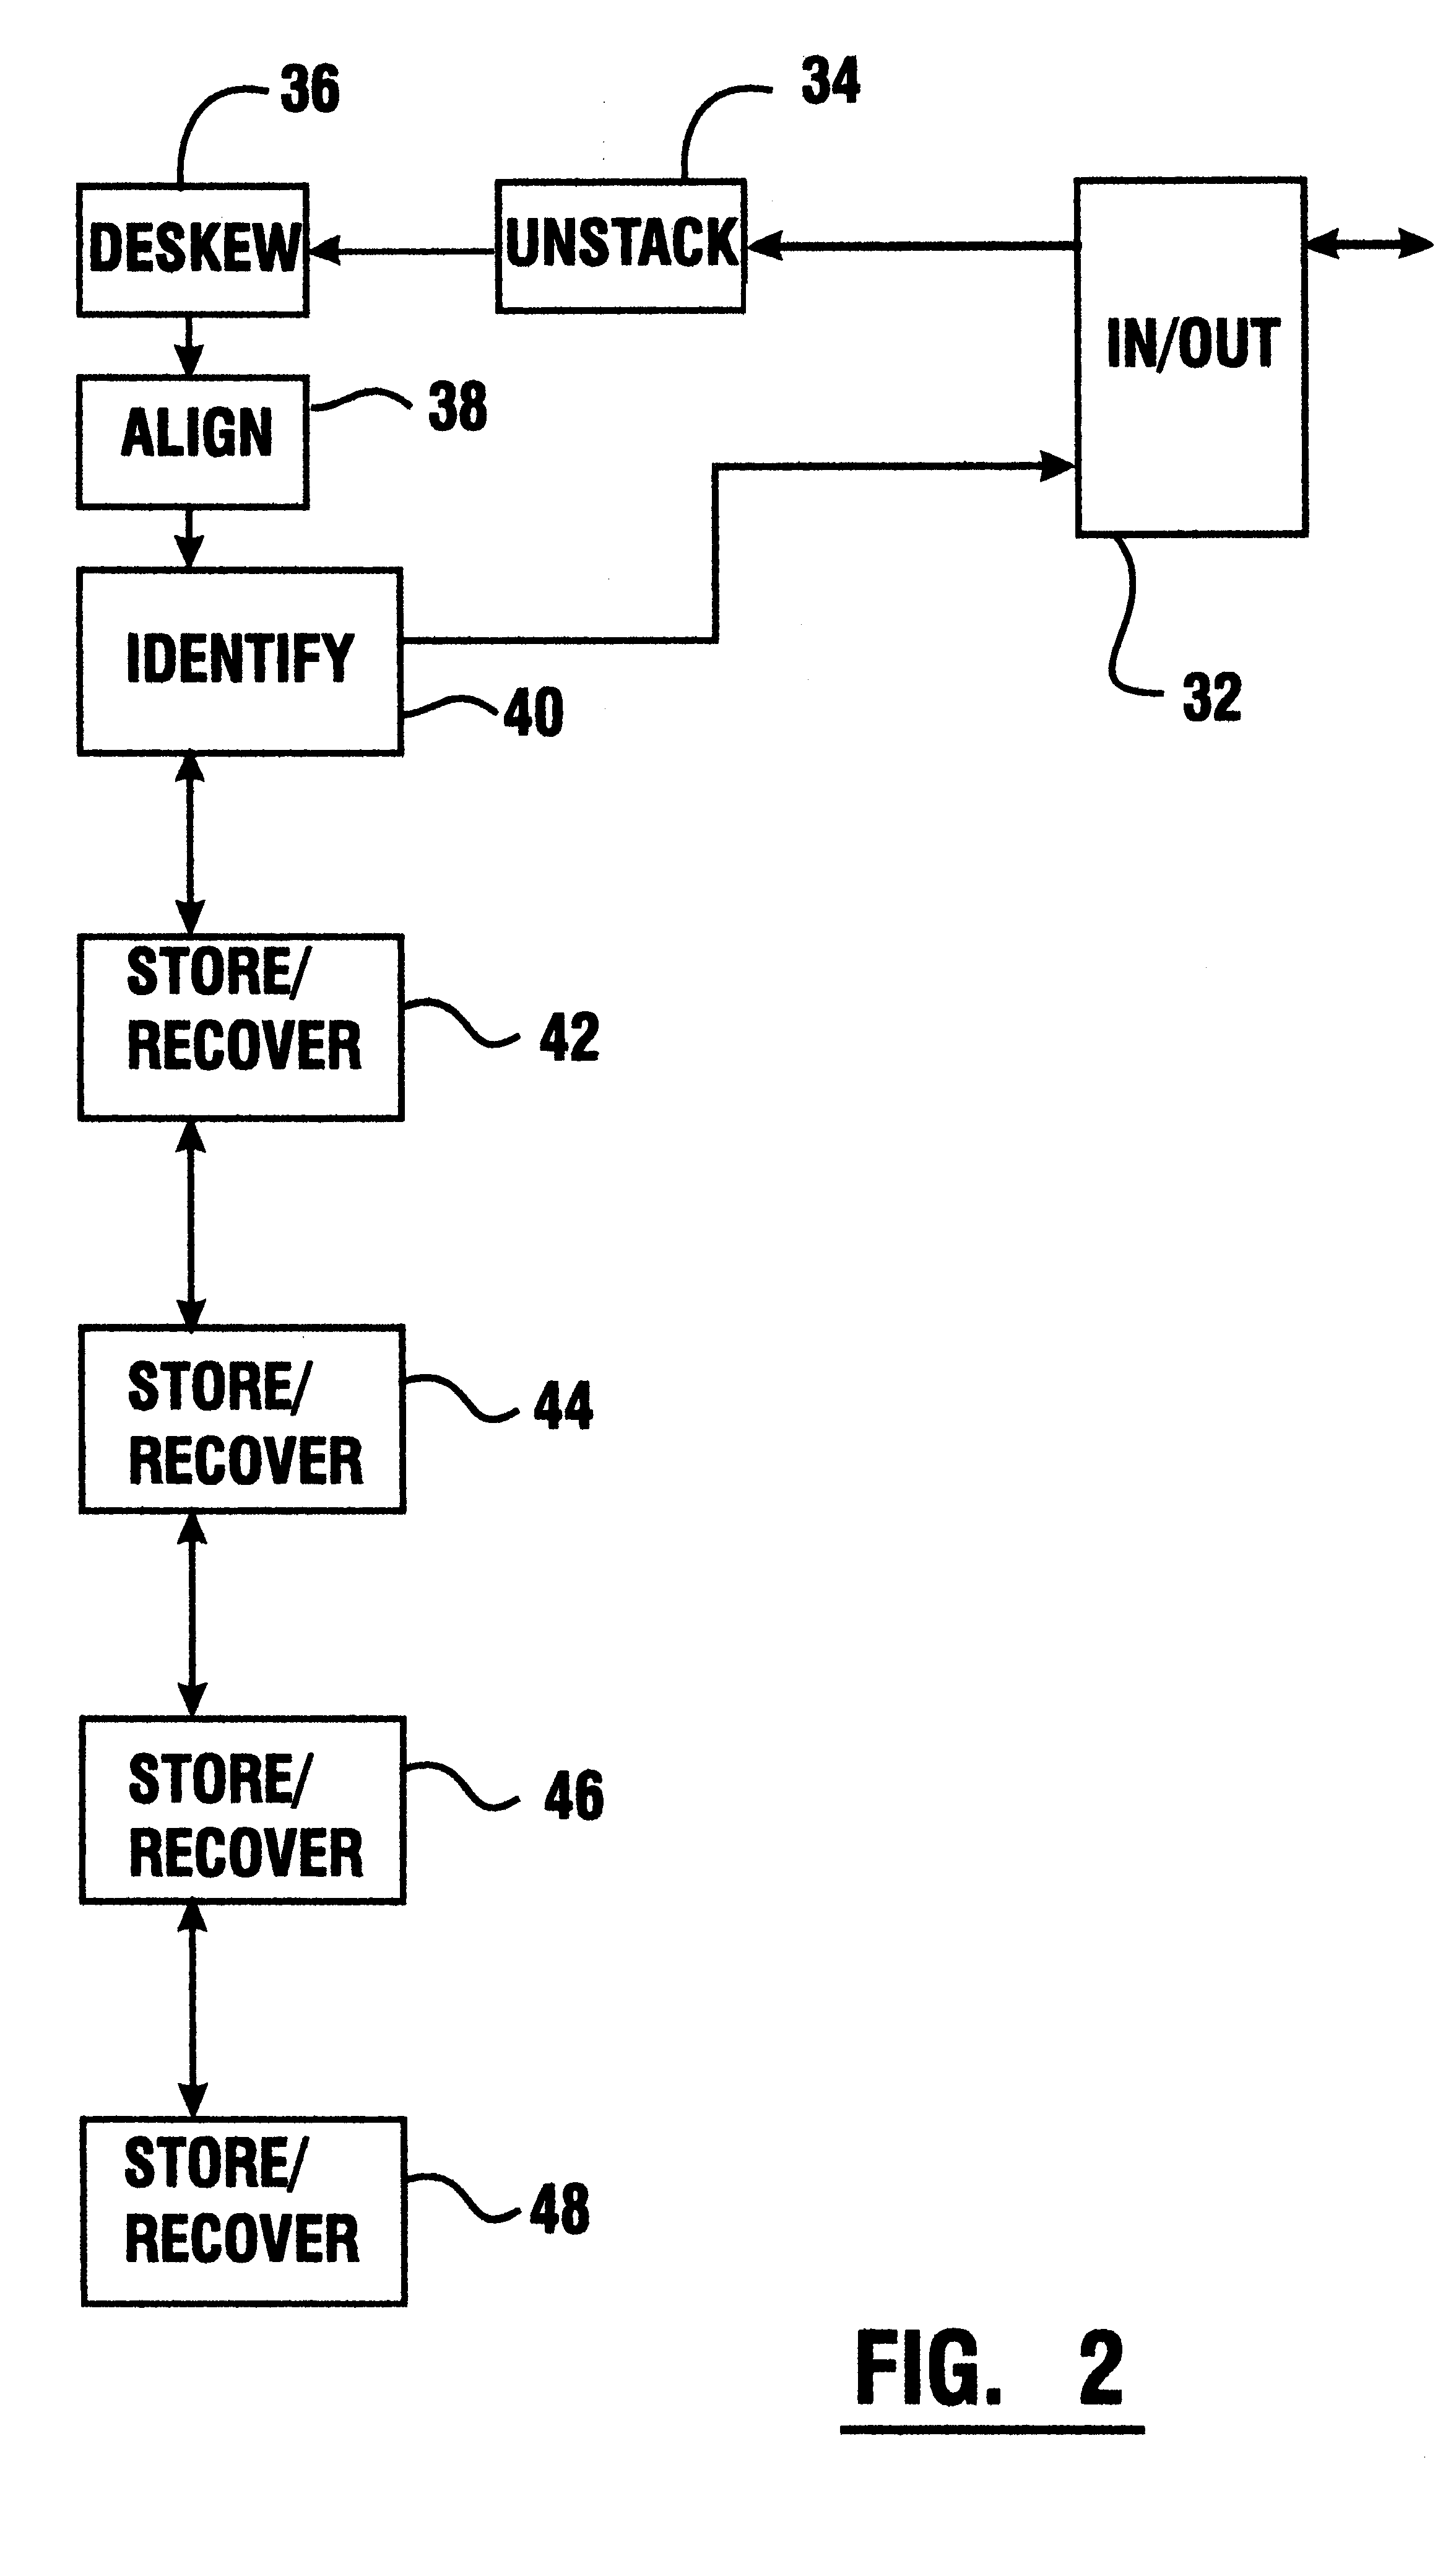 Document unstack system for currency recycling automated banking machine